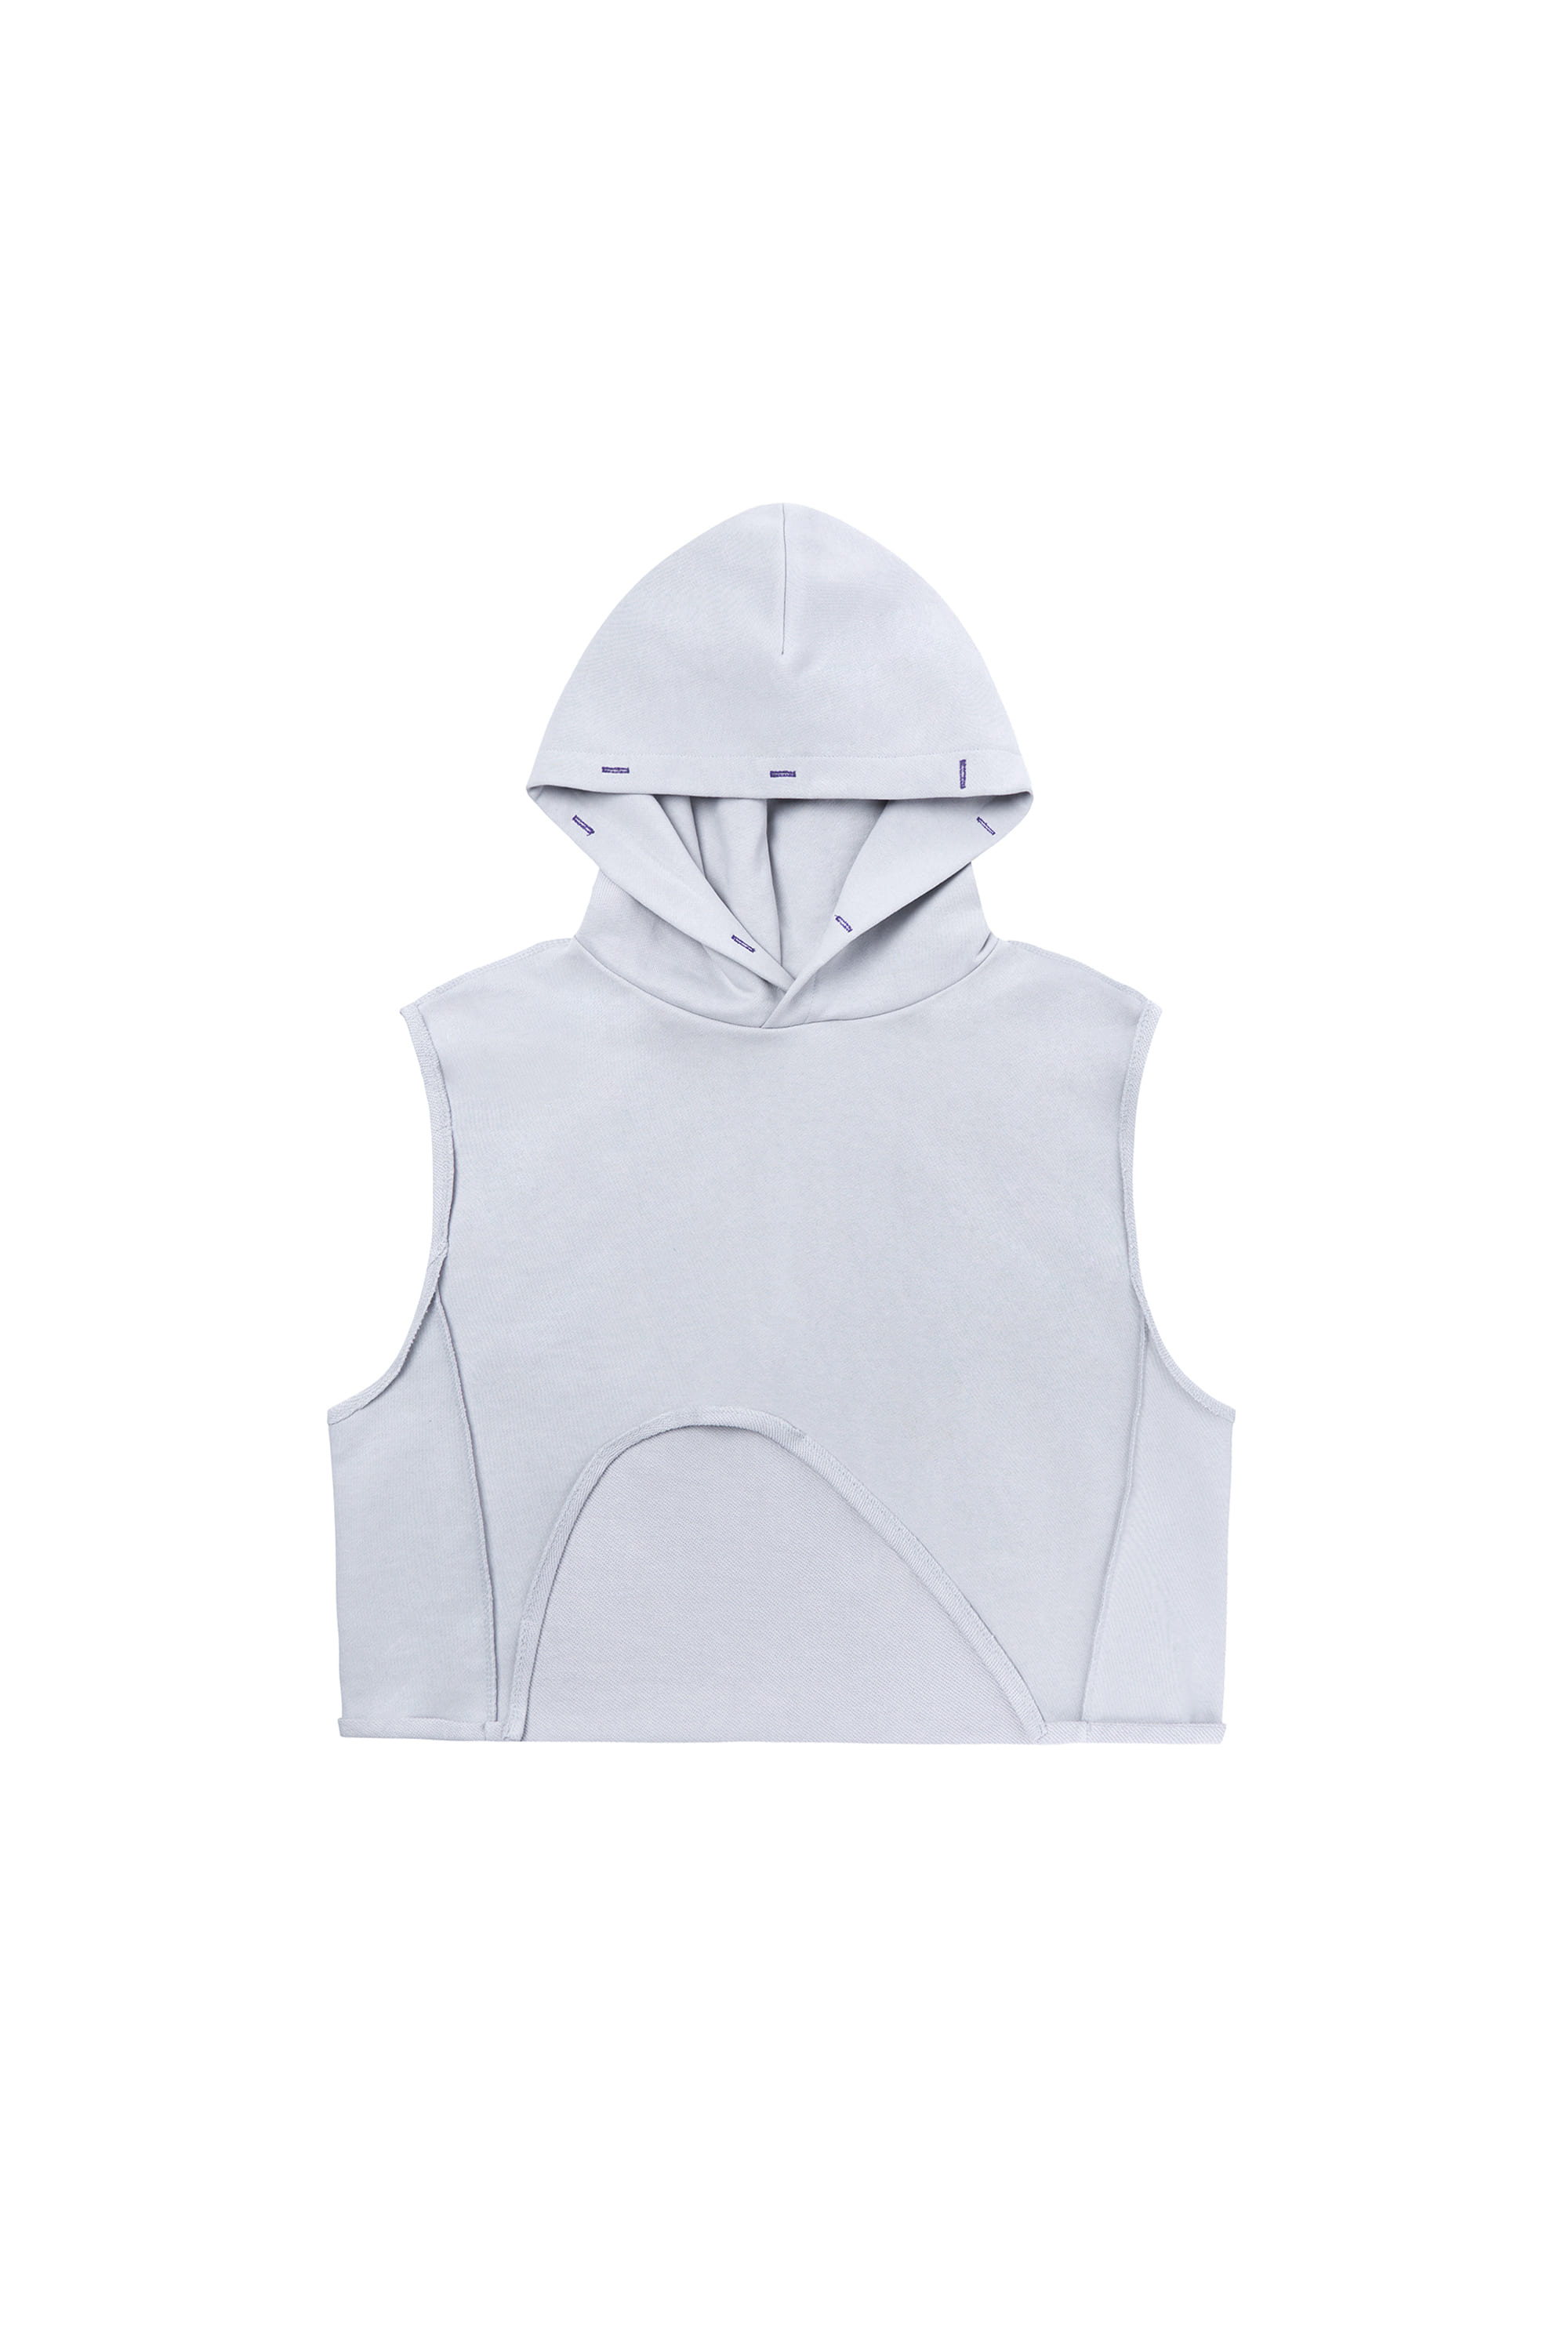 LIBERTY STITCHED SLEEVELESS HOODIE (2 COLORS)